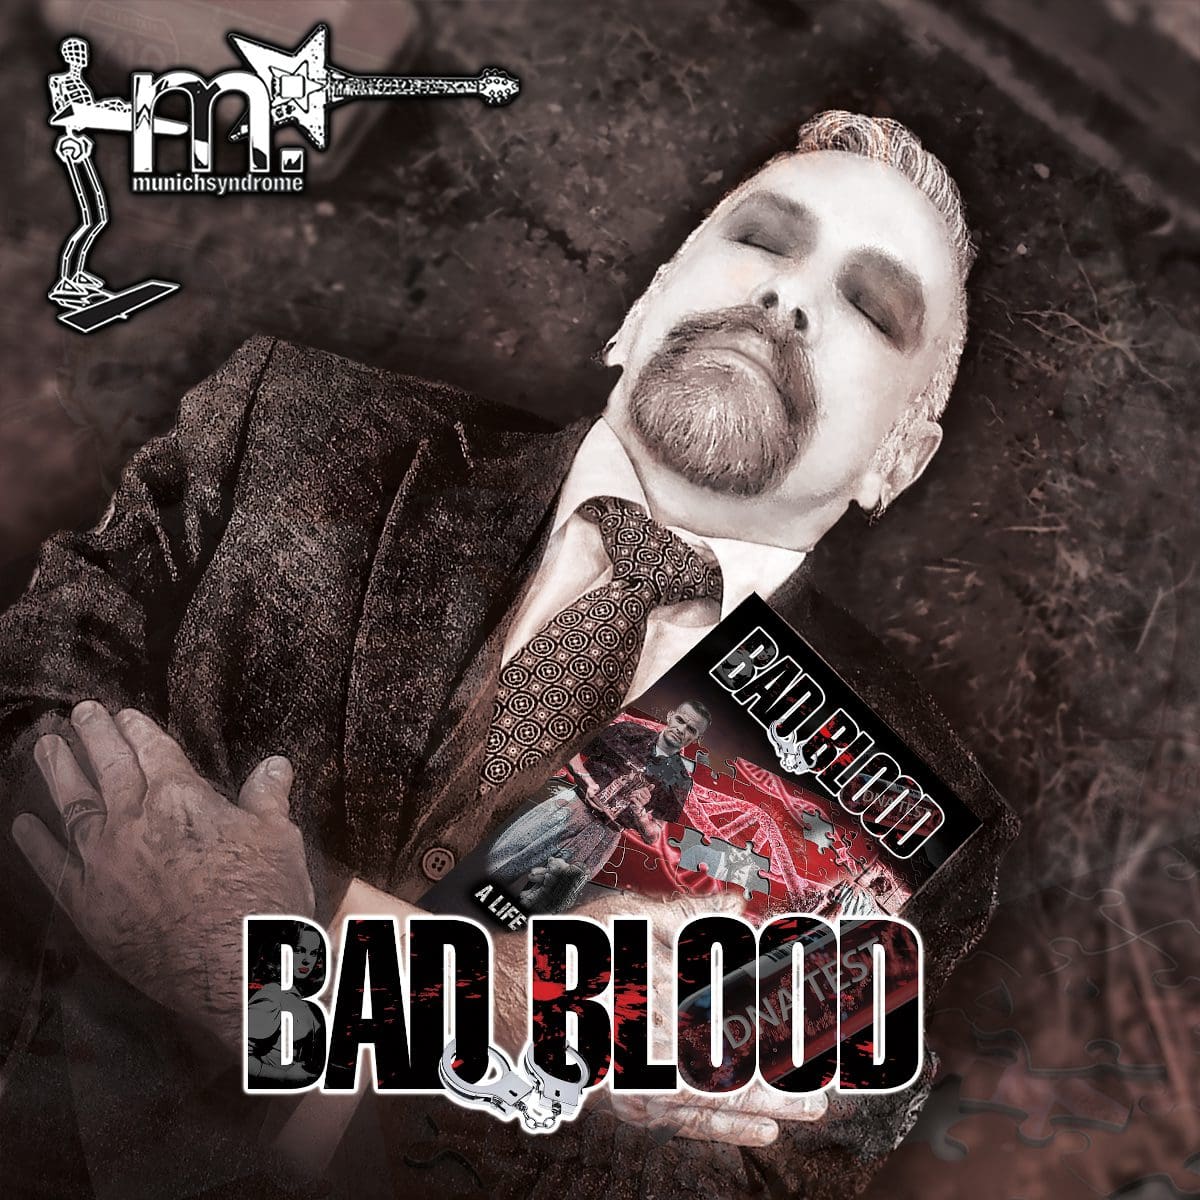 Munich Syndrome back with 11th album 'Bad Blood' - check the previews